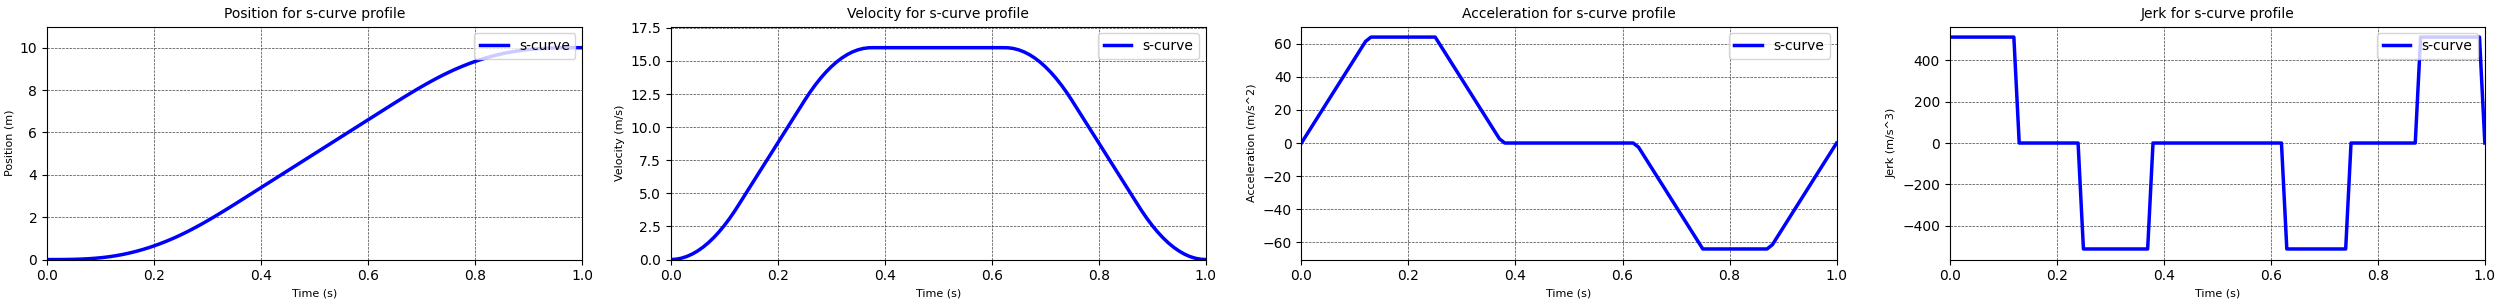 Position, velocity, acceleration and jerk curves for the s-curve motion profile